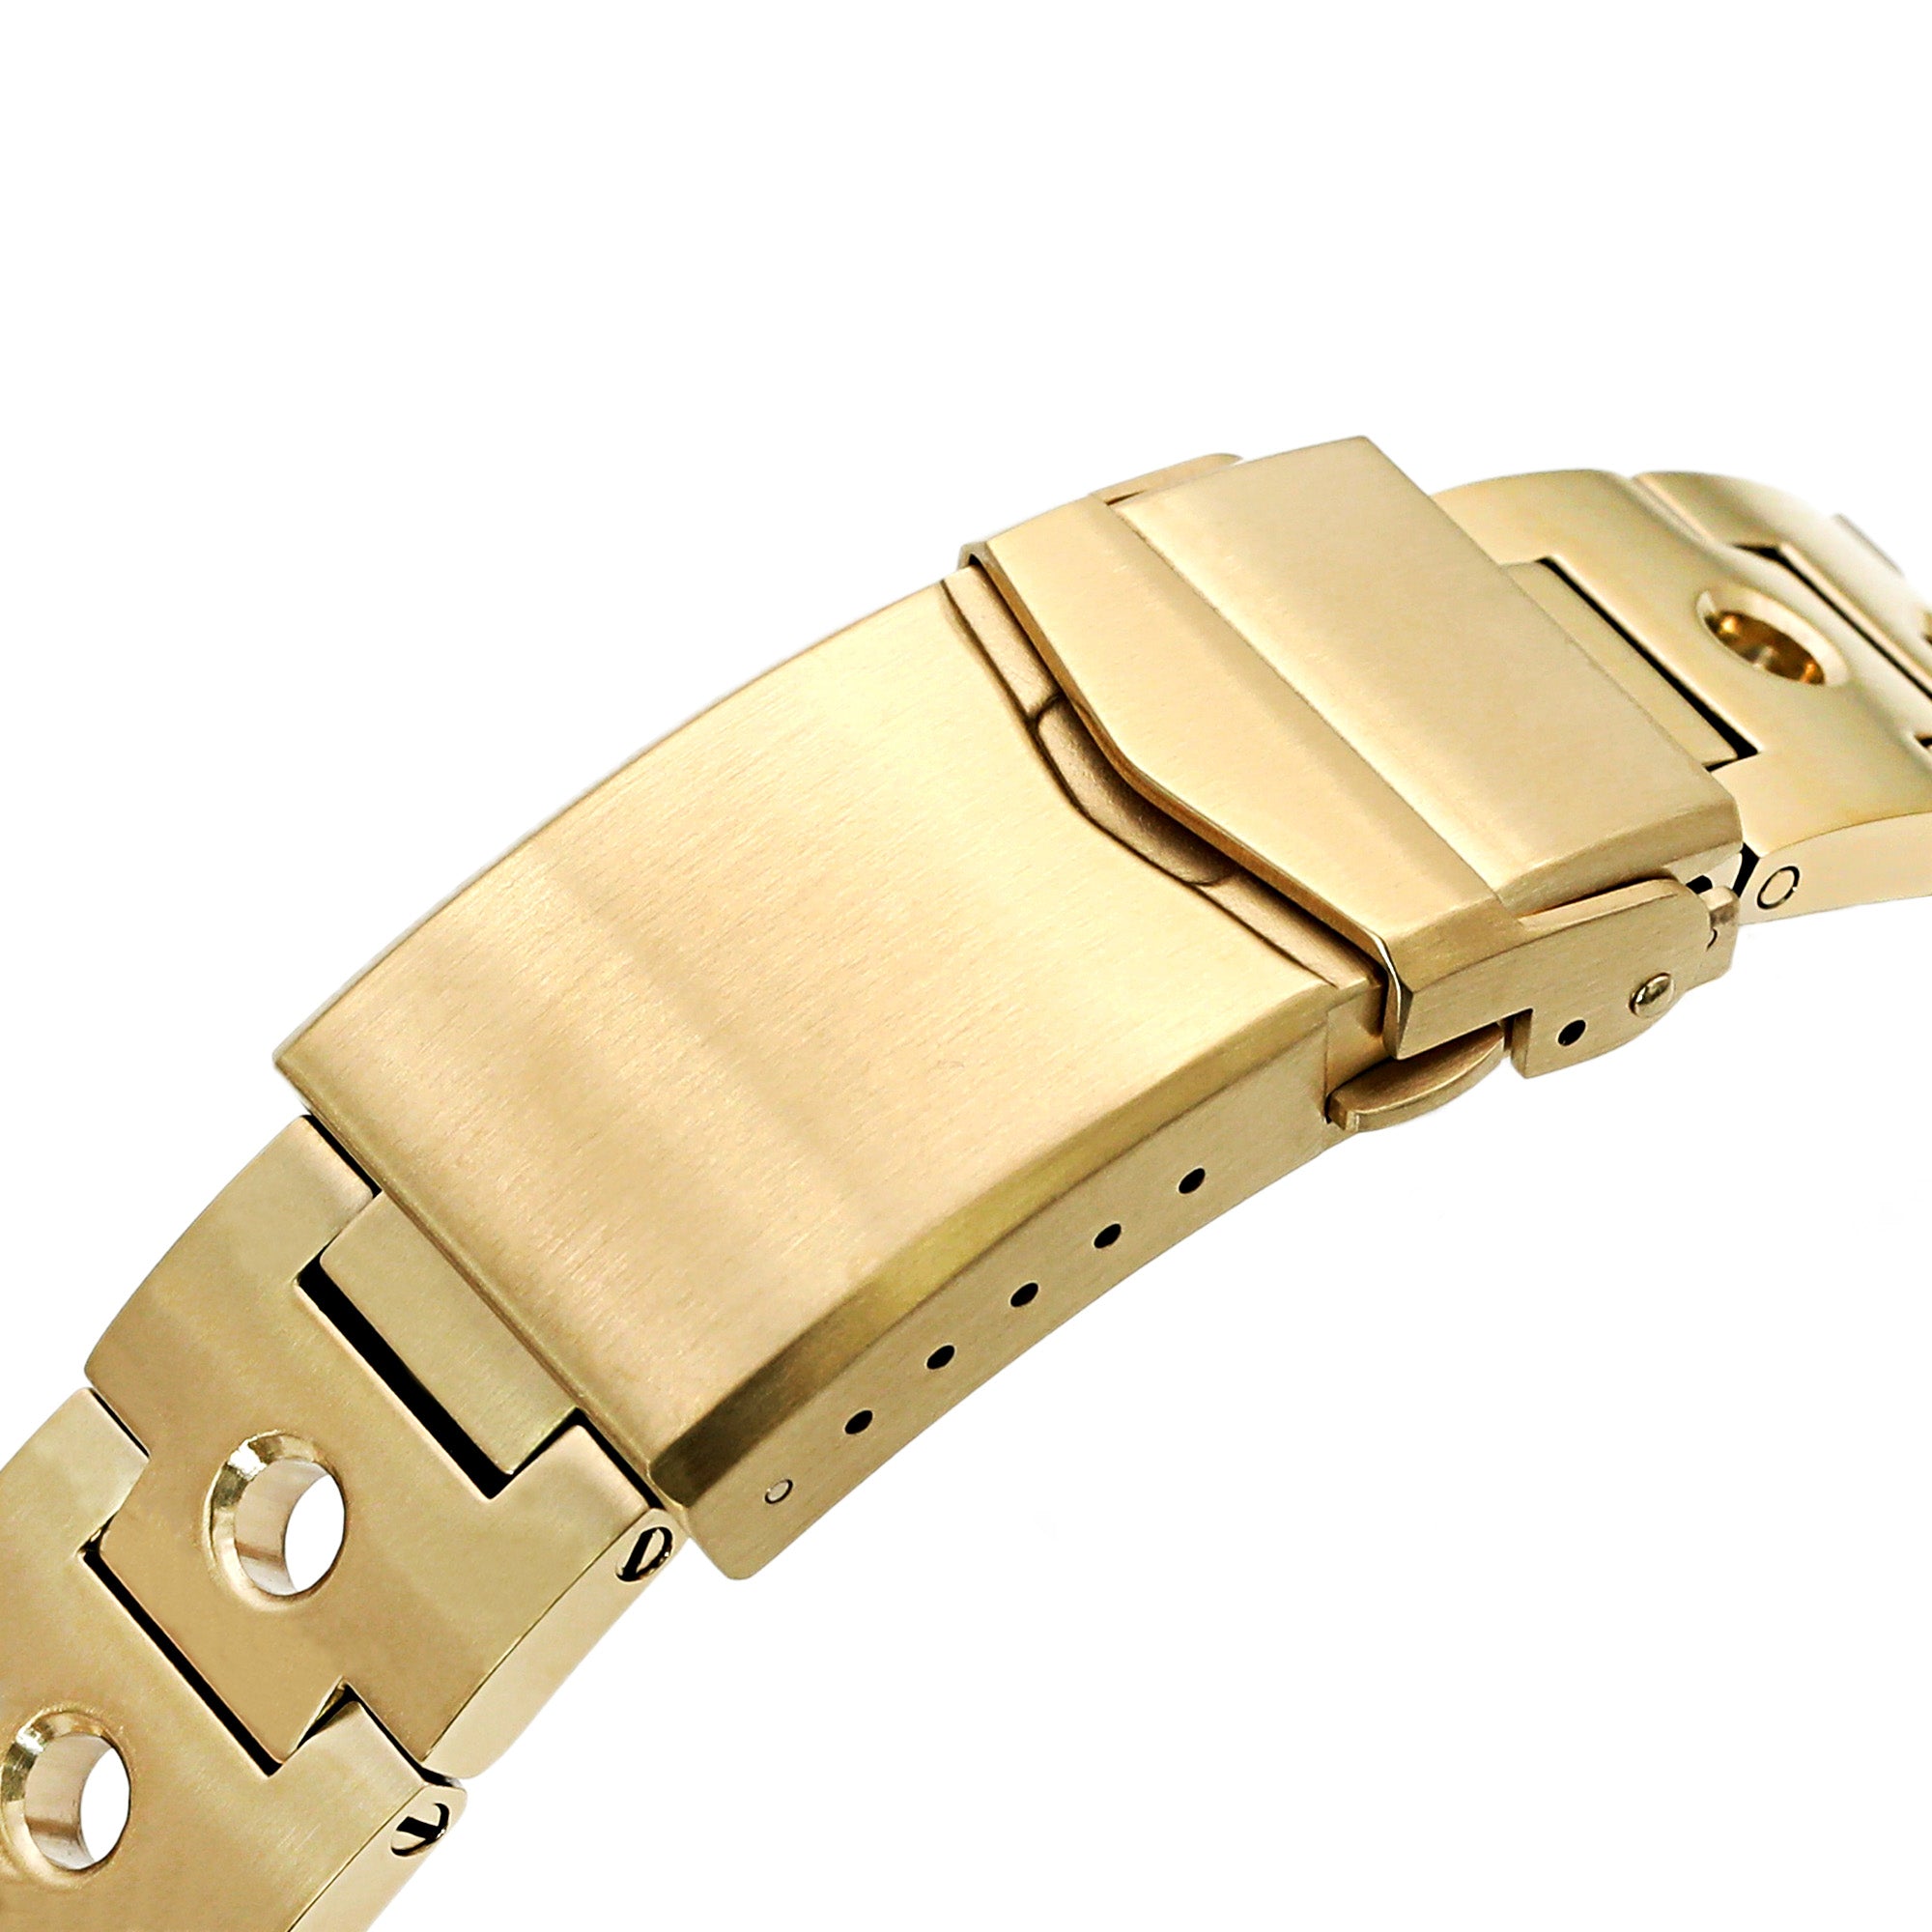 22mm Rollball Watch Band compatible with Seiko Gold Turtle SRPC44, 316L Stainless Steel Full IP Gold V-Clasp